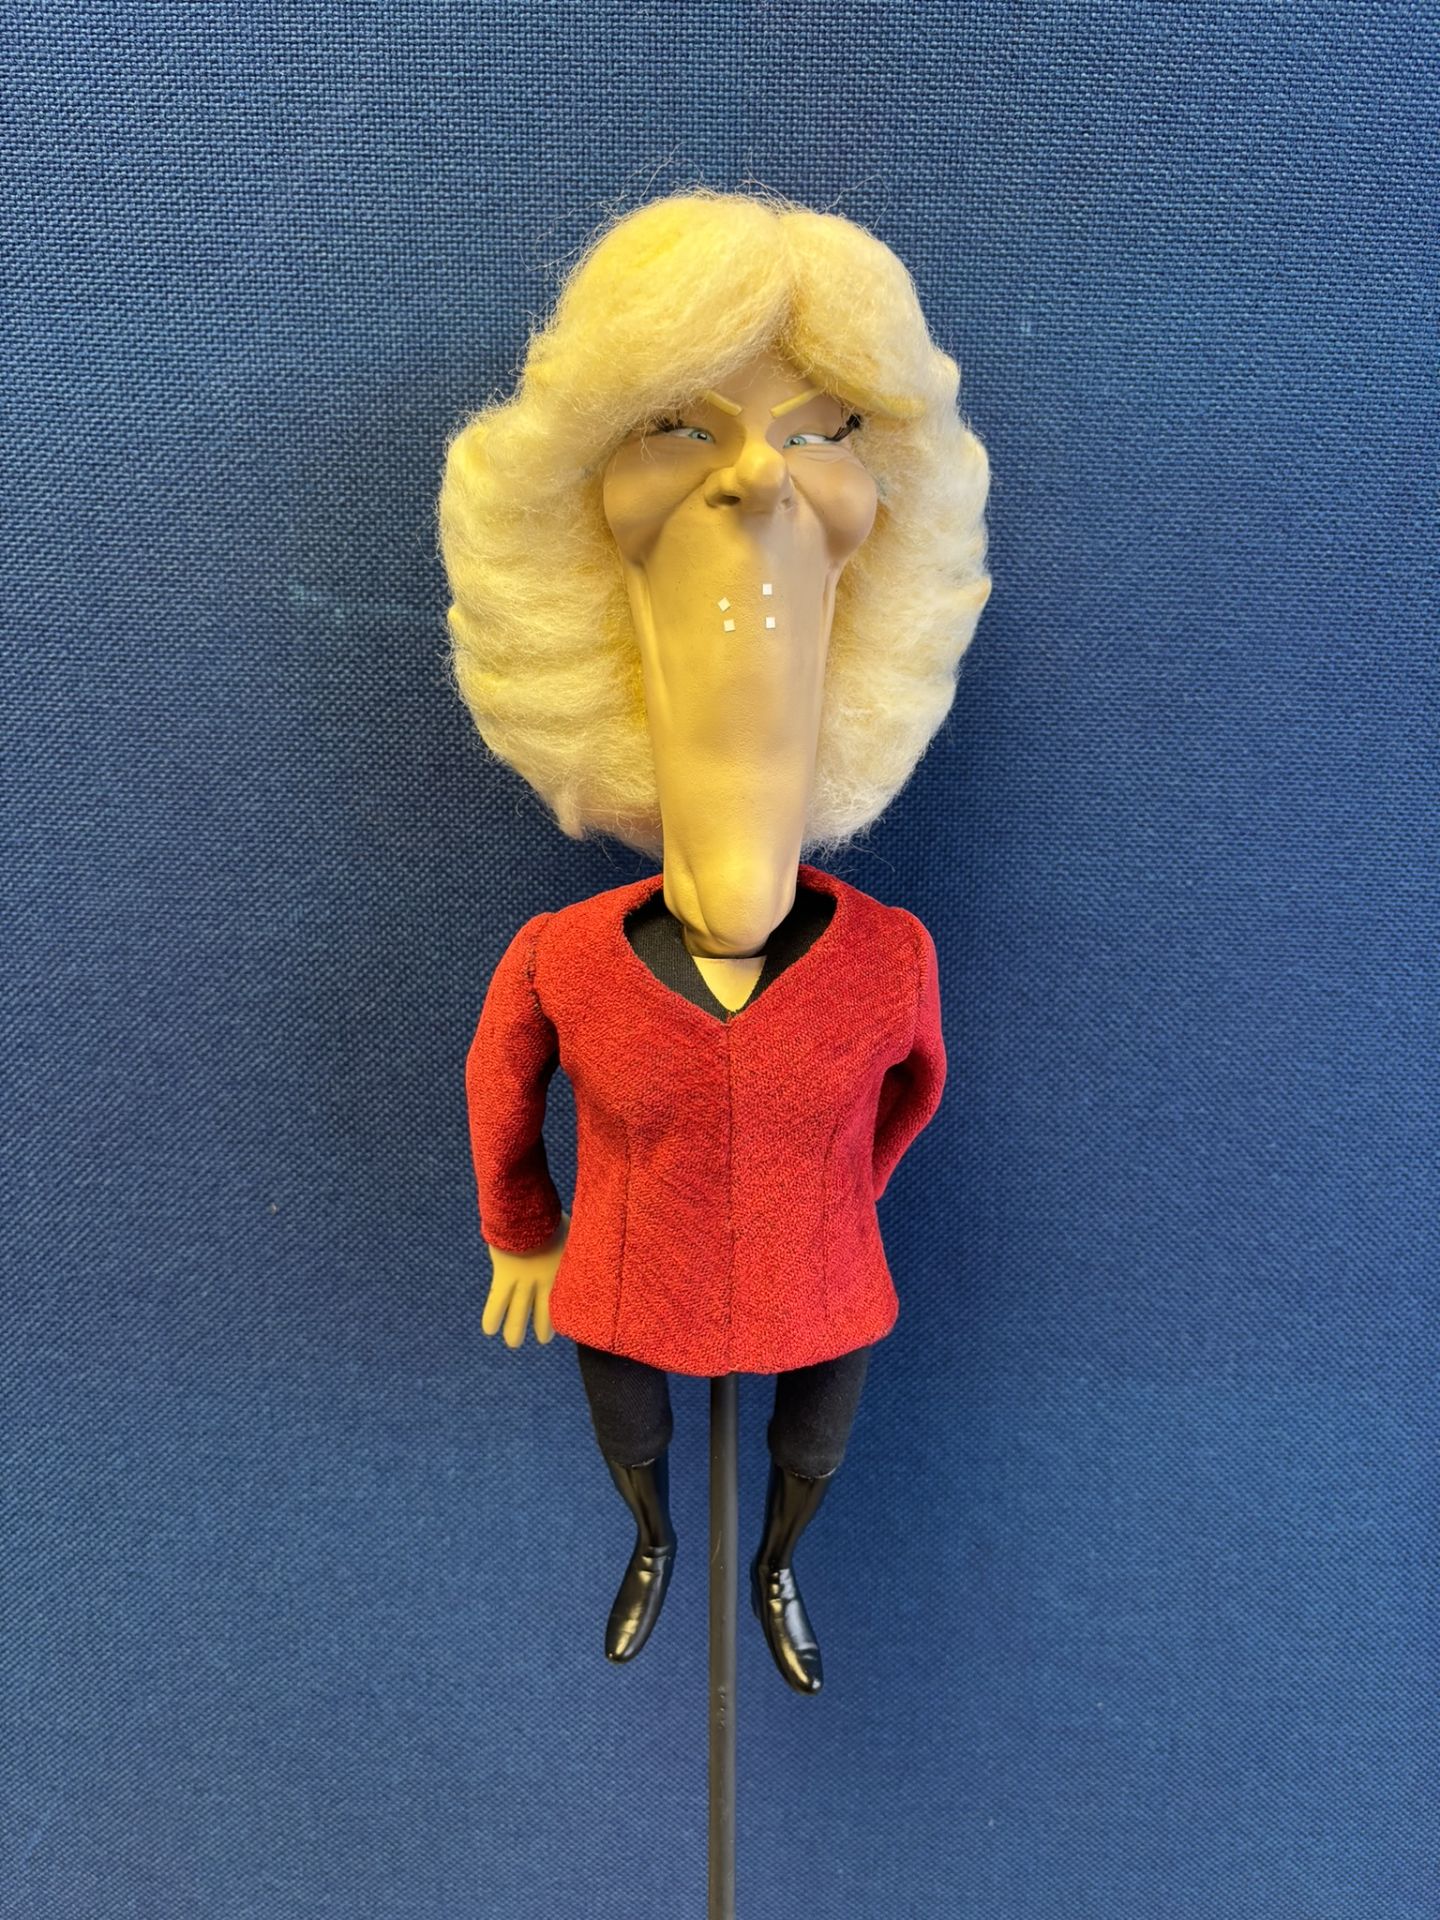 Newzoid puppet - Camilla Parker-Bowles - Image 2 of 4